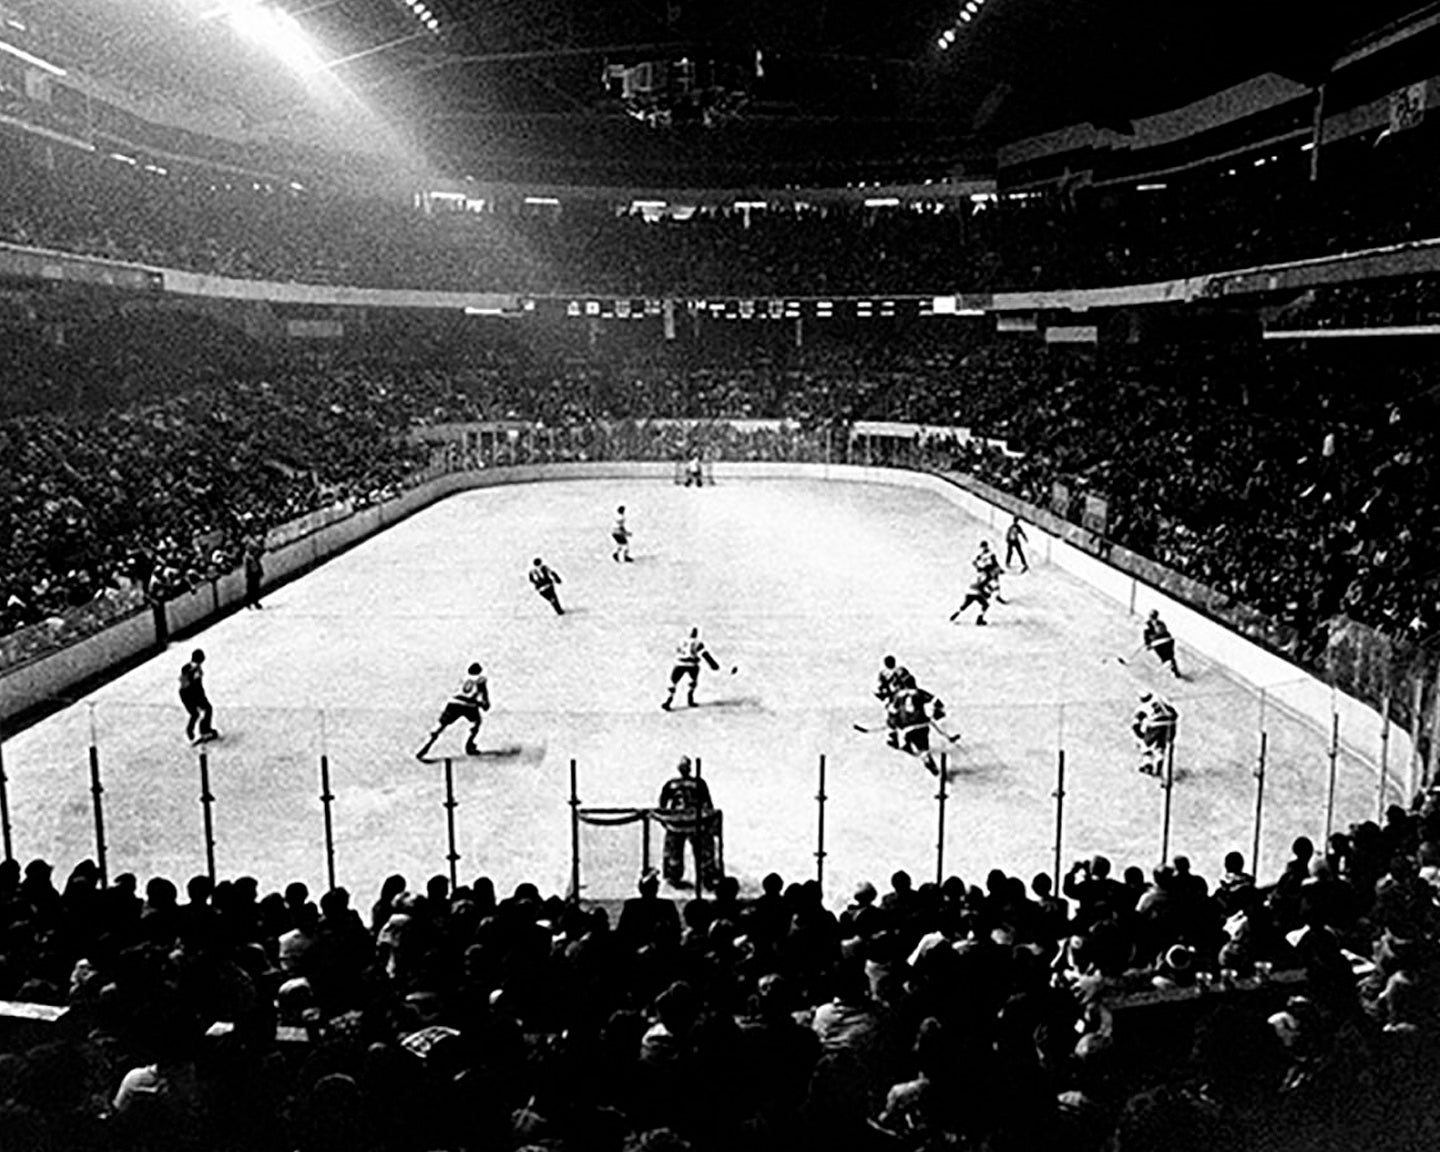 Last Game at Olympia Stadium (Feb 21, 1980) - Officially Licensed Detroit News Metal Print